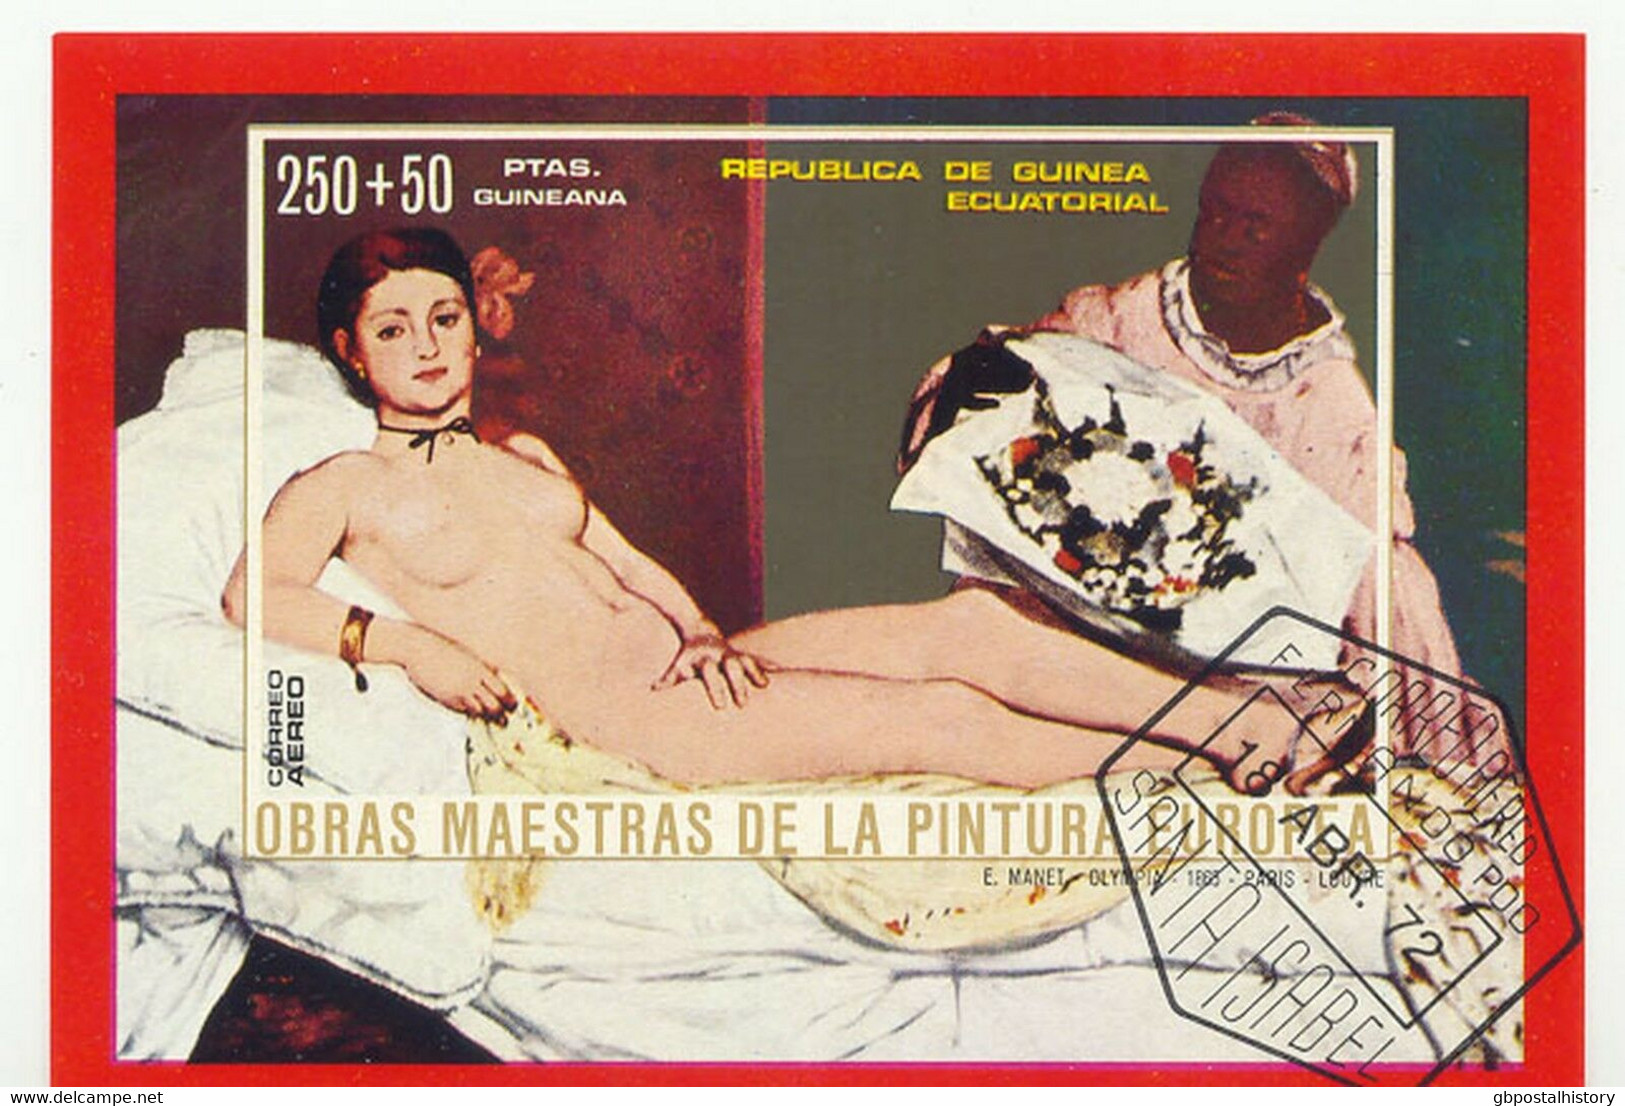 EQUATORIAL GUINEA 1972 Nude Painting By P. Manet 250+50 Ptas. IMPERFORATED Superb Used M/S ERROR/VARIETY Kissed Backside - Equatoriaal Guinea